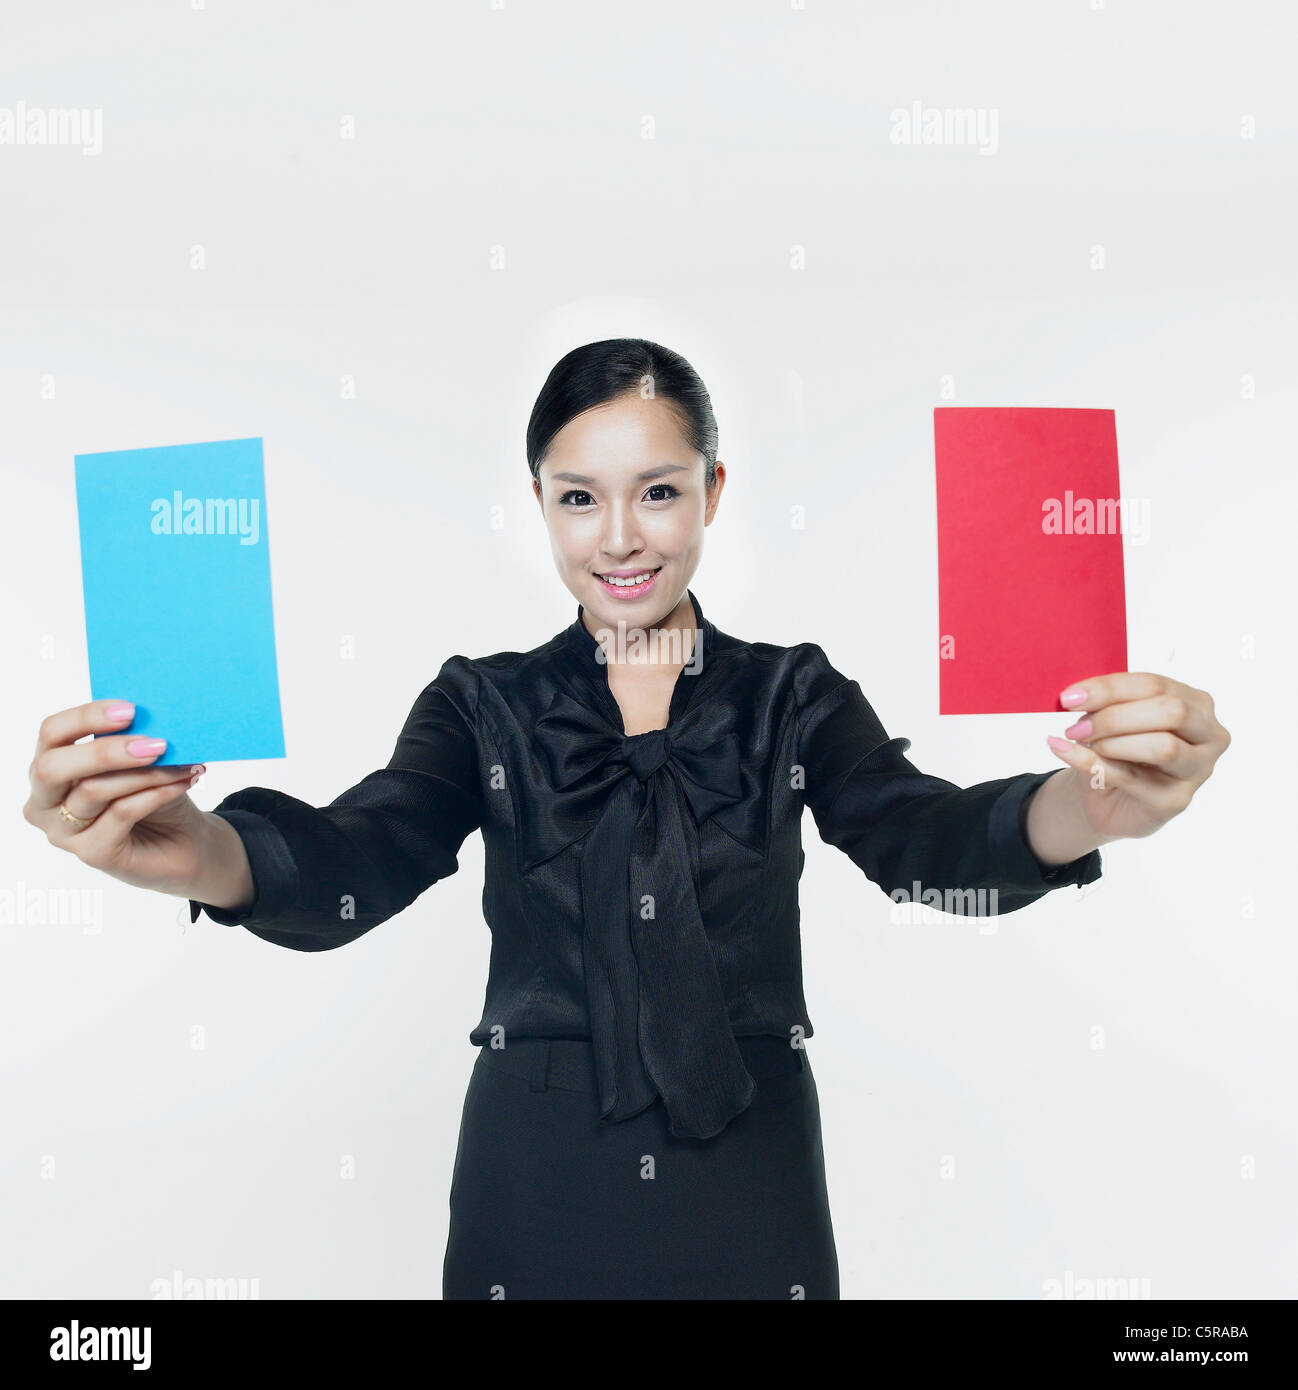 A woman holding a red card and a blue card Stock Photo